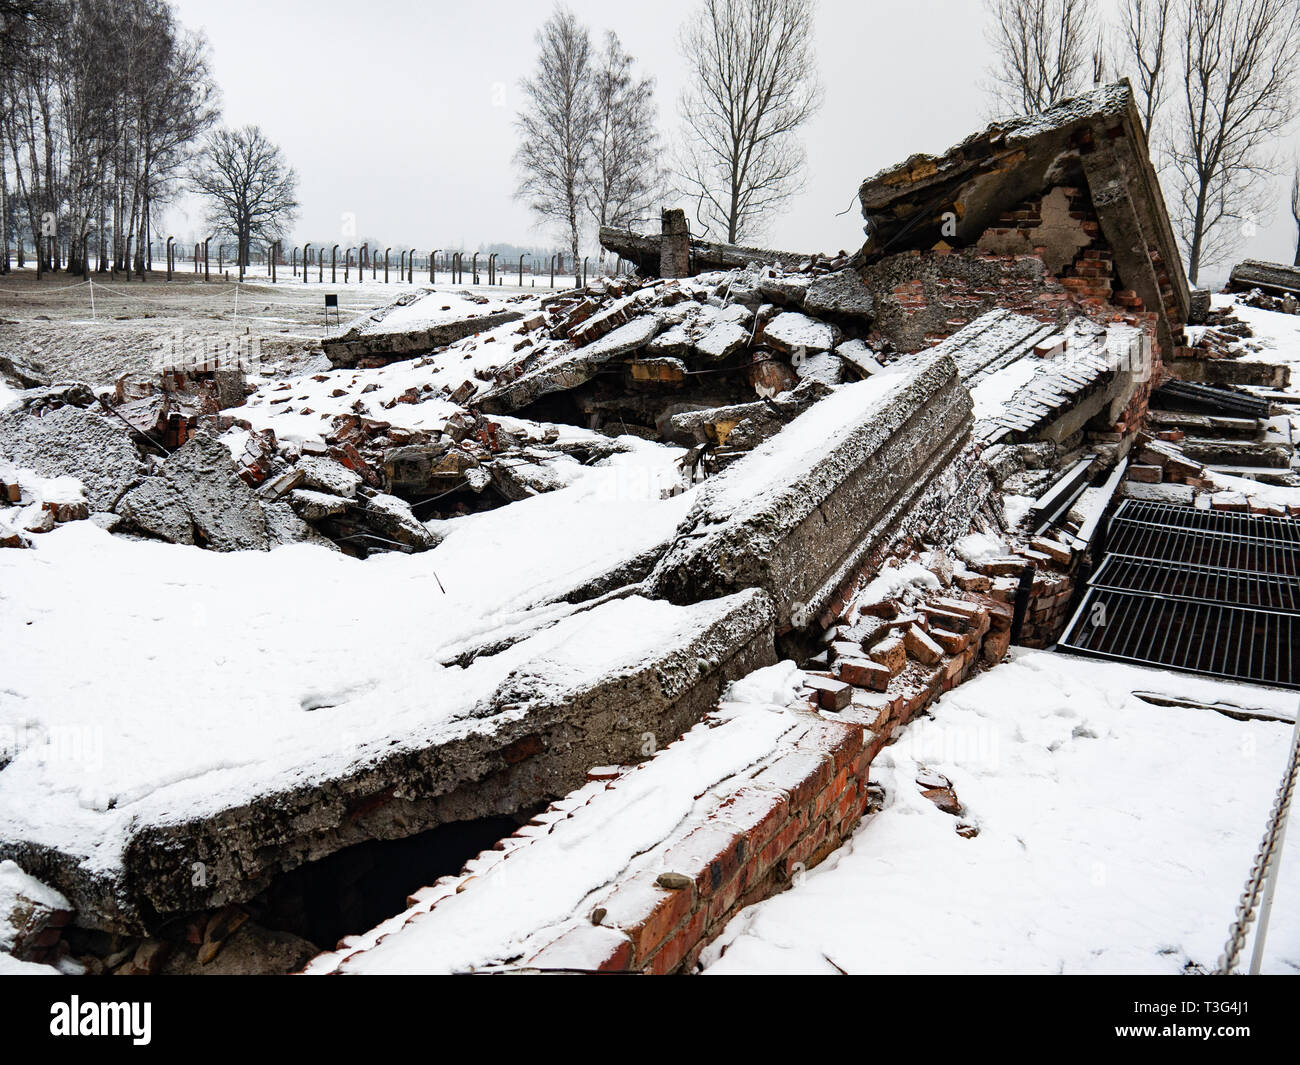 Remains of gas chamber and crematorium, Auschwitz Birkenau, concentration camp, death camp, Poland Stock Photo